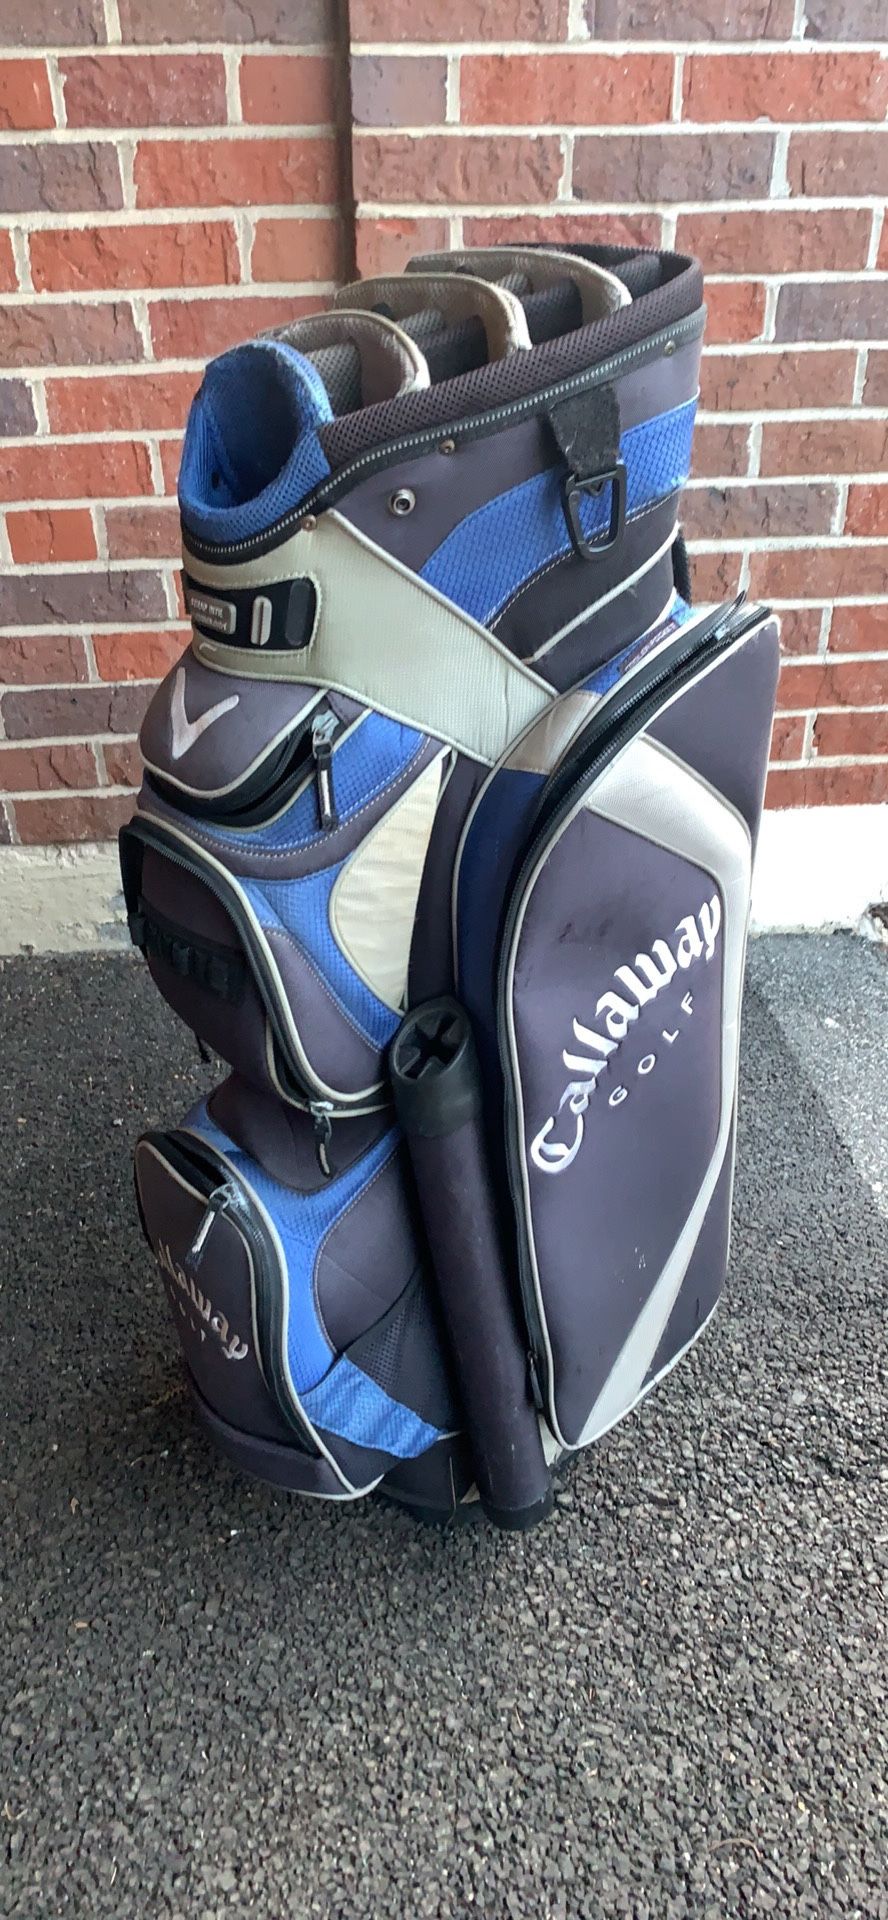 Callaway Golf Bag with strap